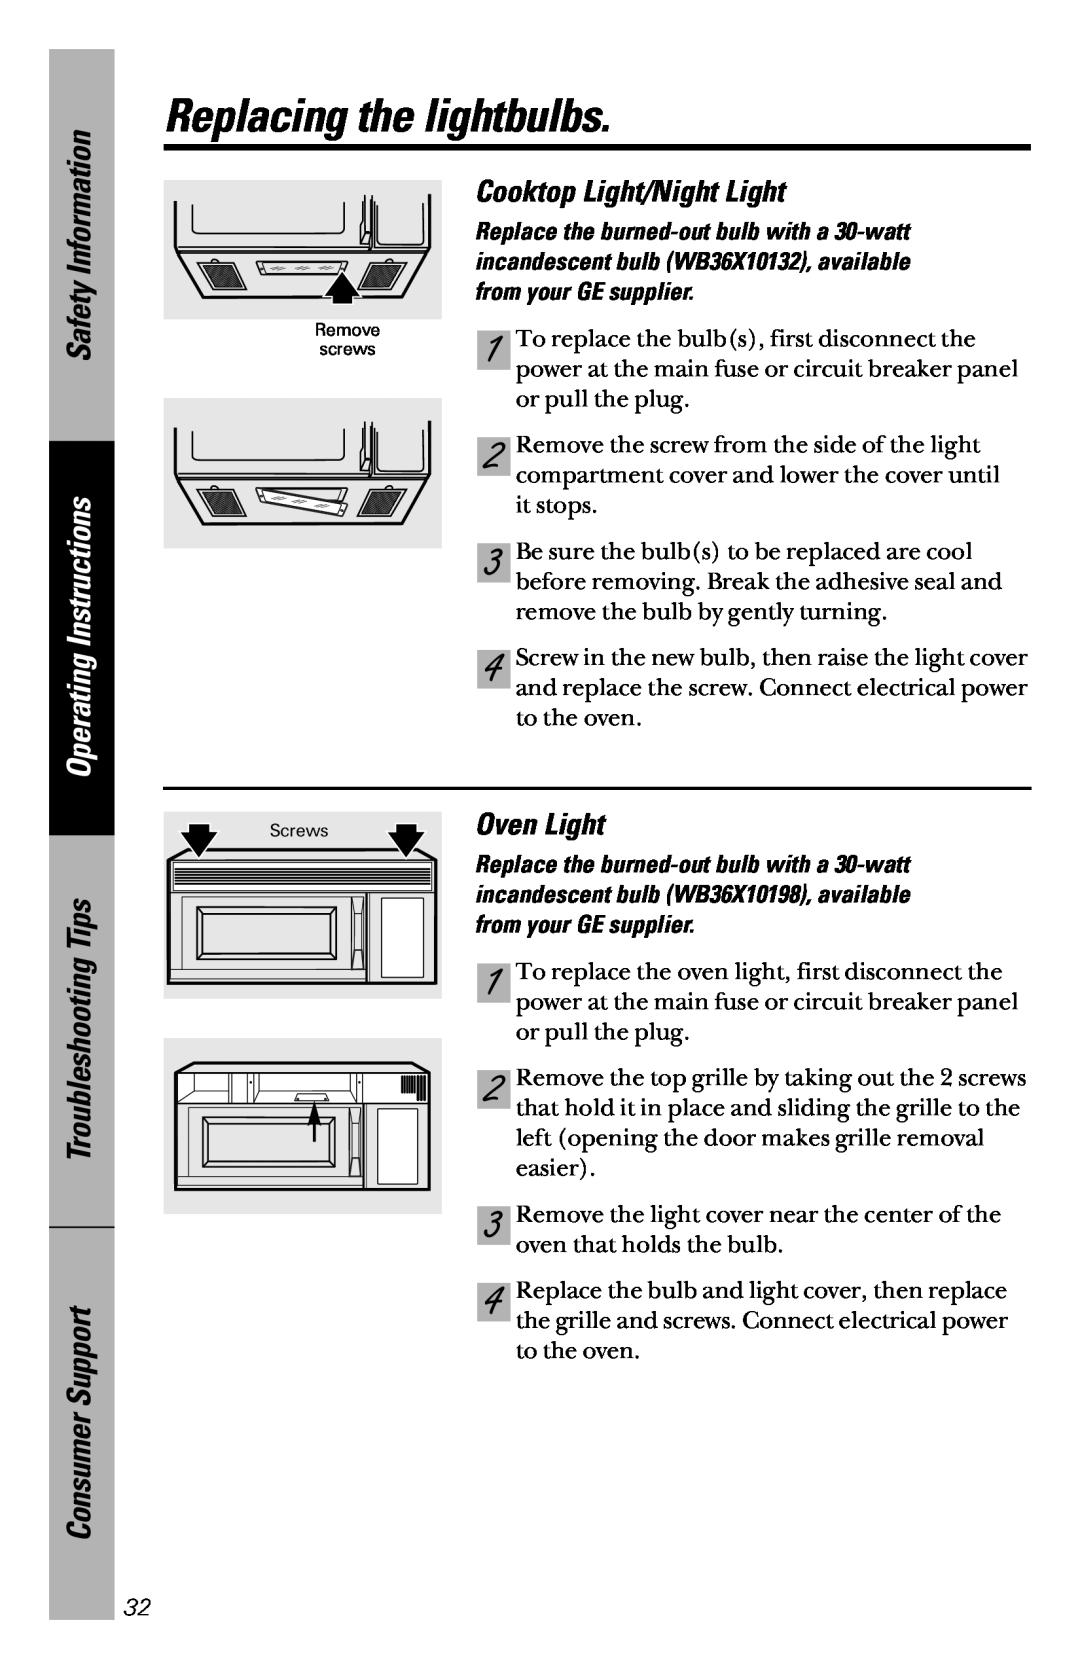 GE JVM1533 Replacing the lightbulbs, Cooktop Light/Night Light, Oven Light, Safety Information, Operating Instructions 